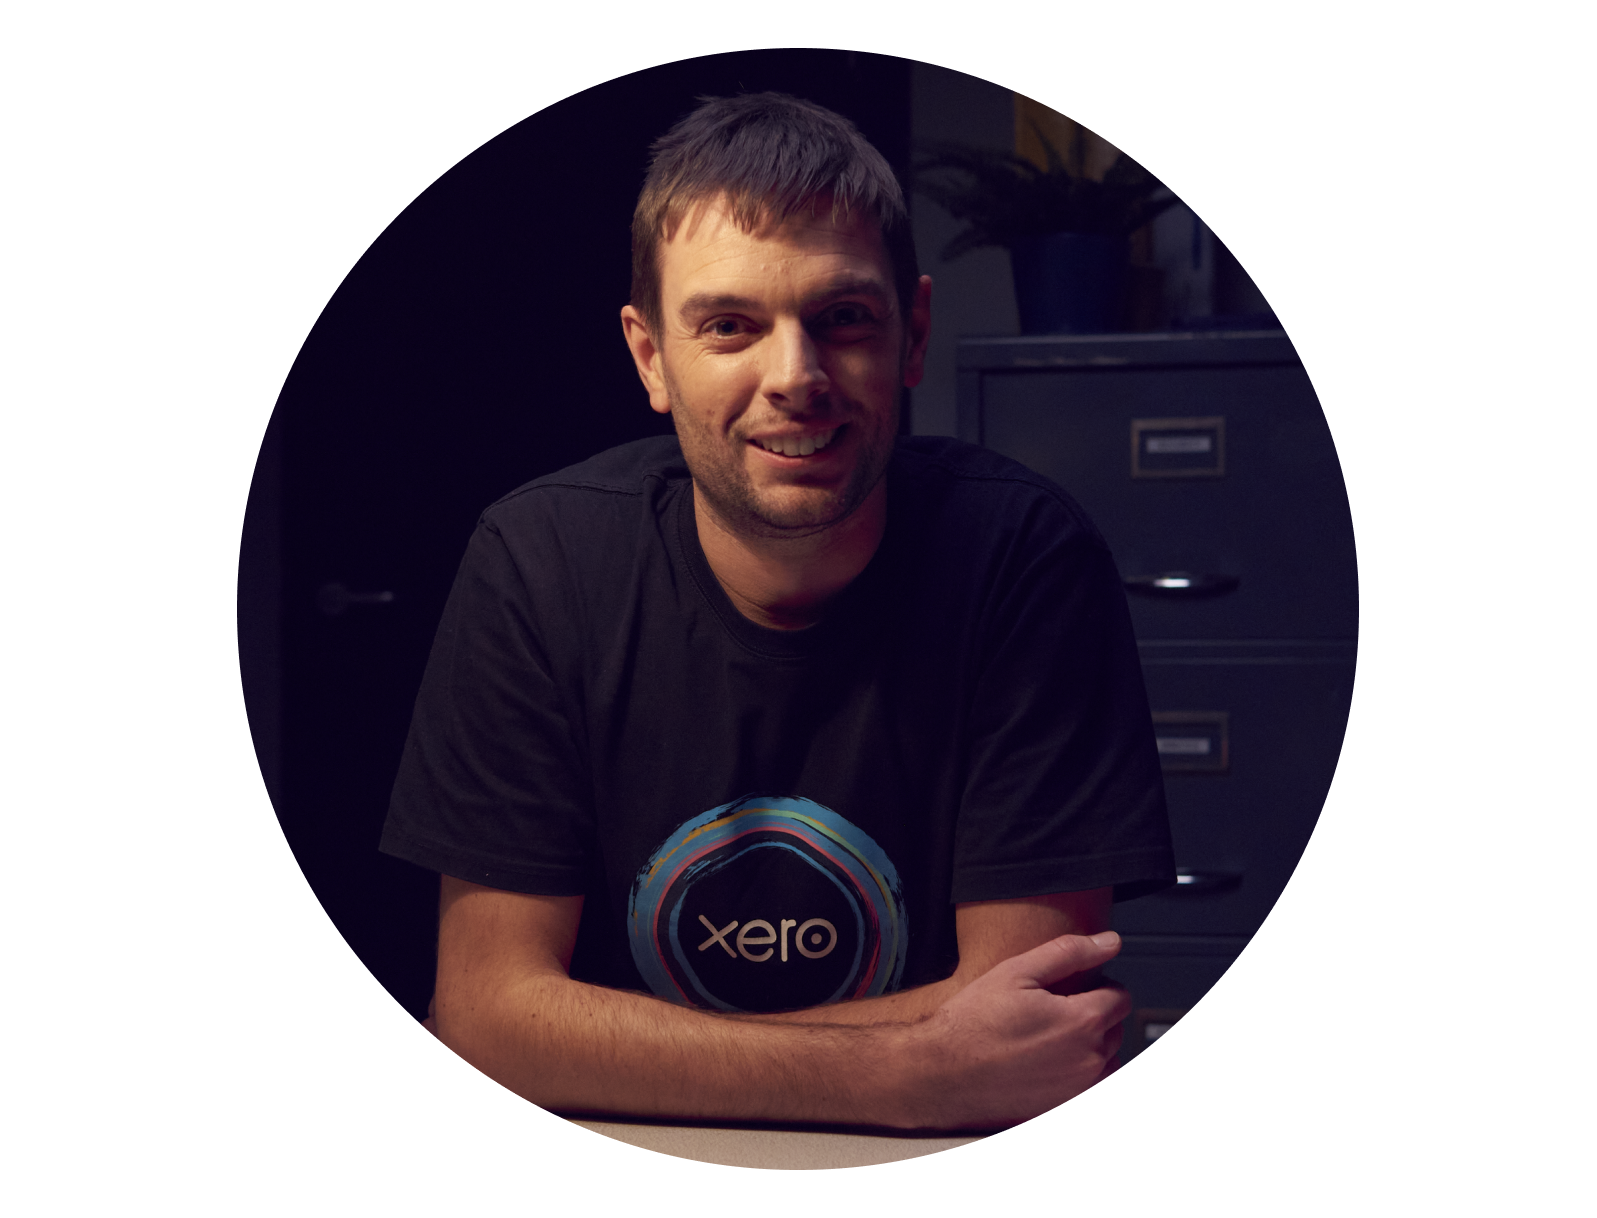 Myth #3: Xero’s support is automated with no real people behind it